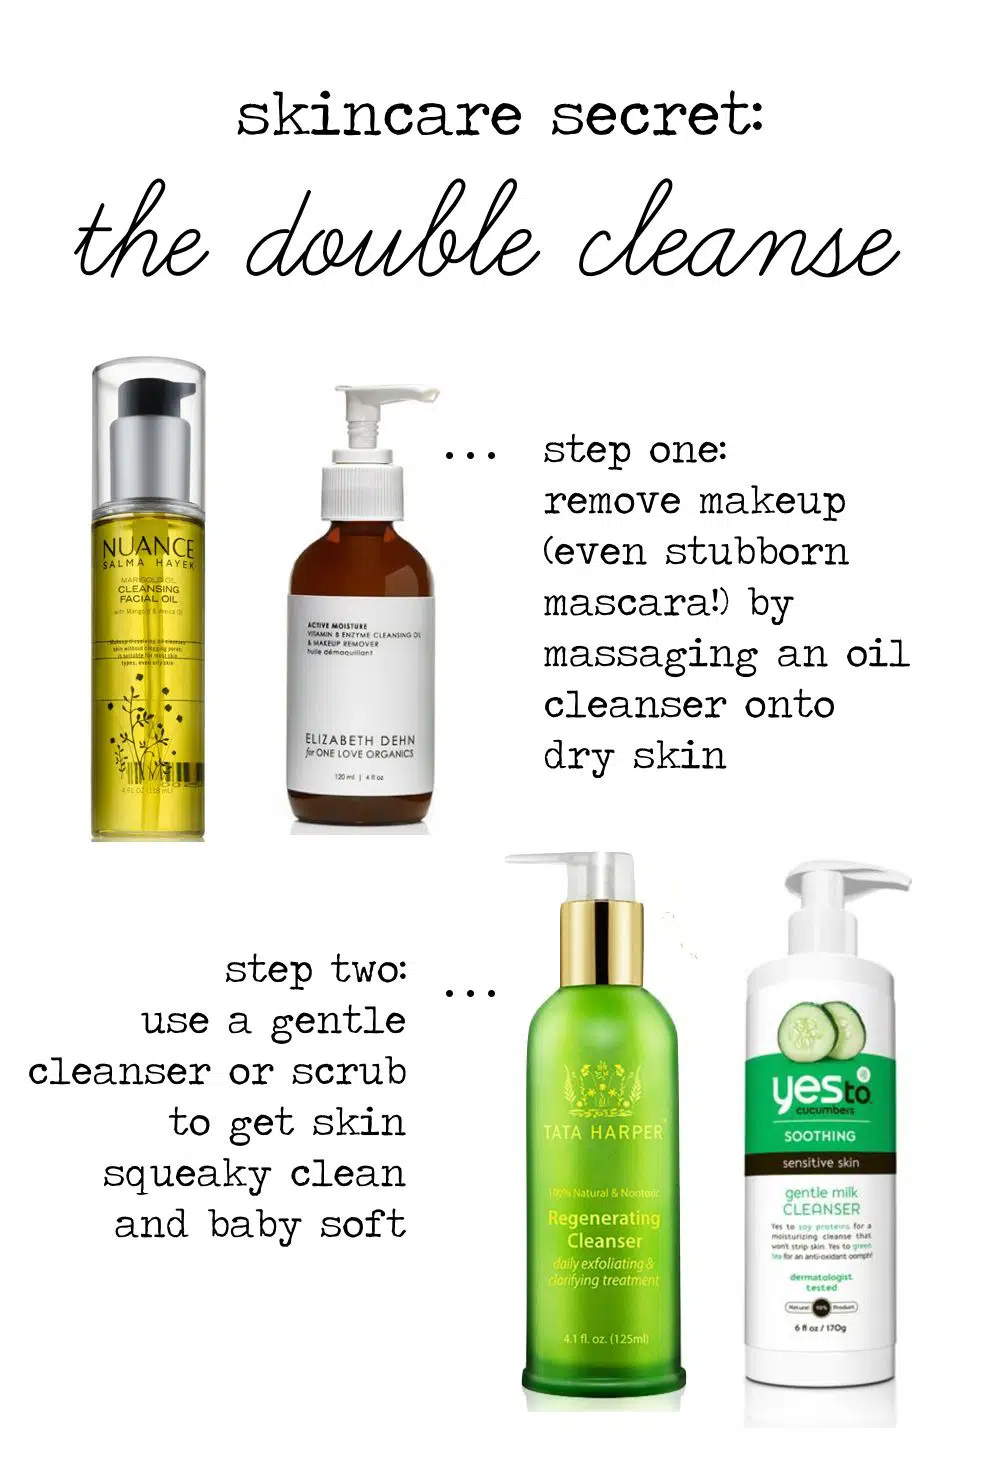 double-cleansing-made-easy